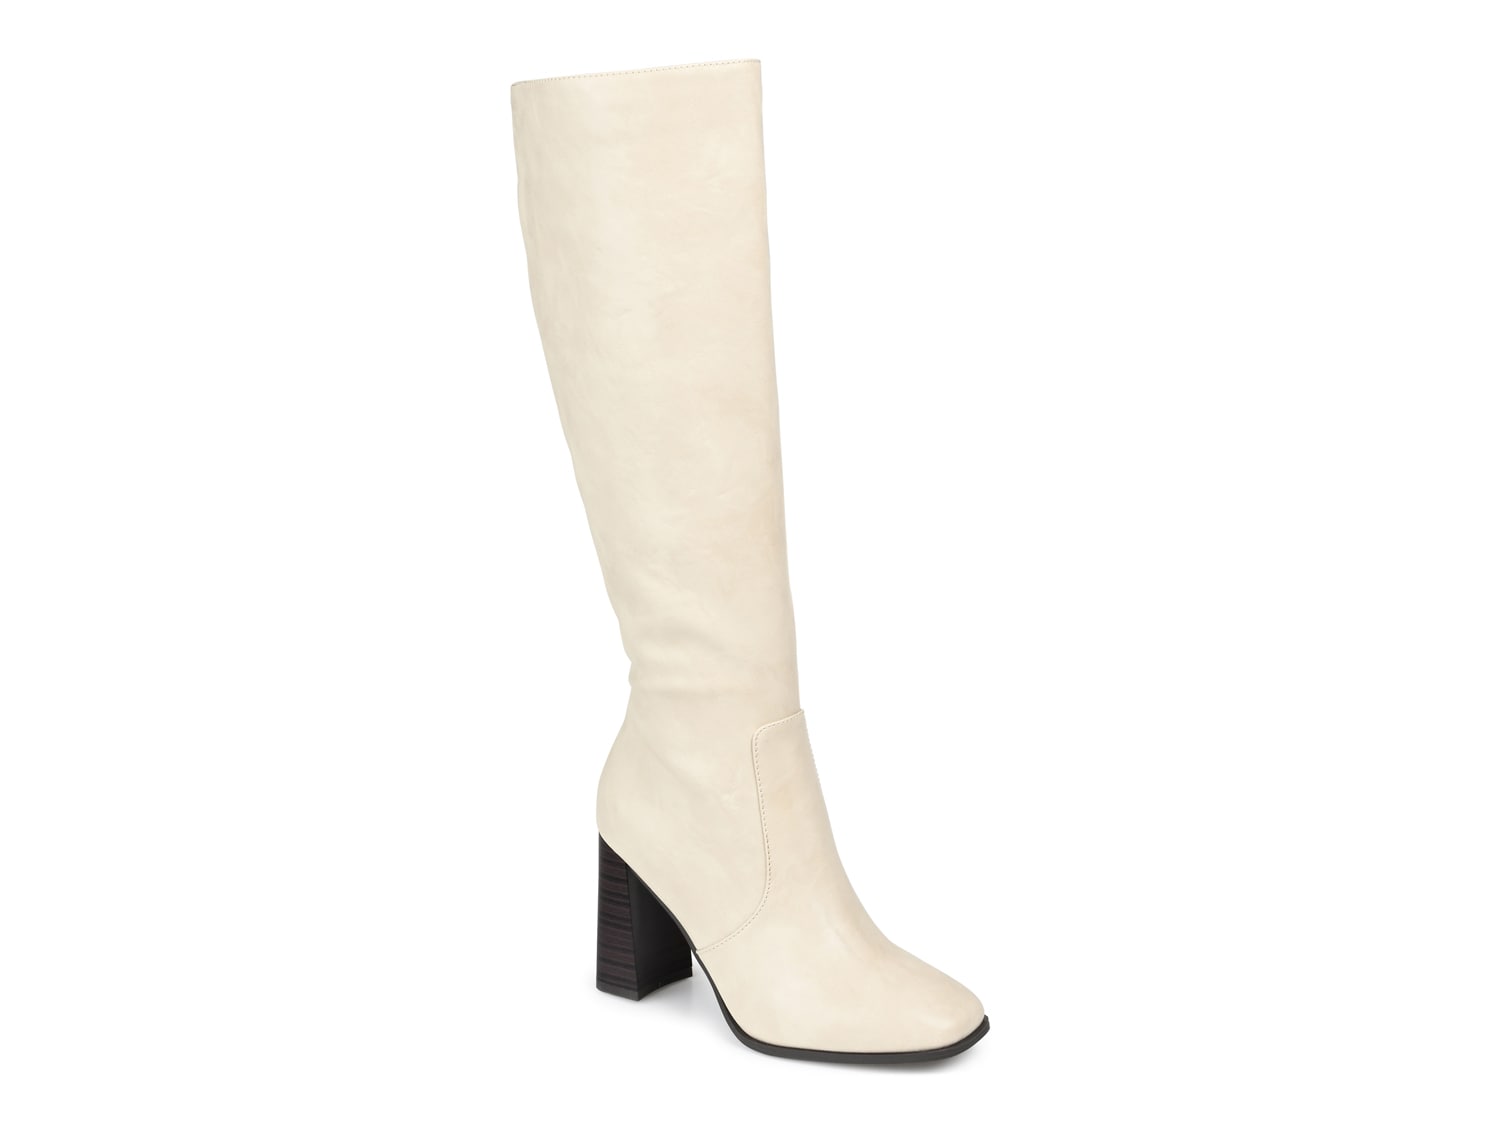 Journee Collection Karima Extra Wide Calf Boot - Free Shipping | DSW